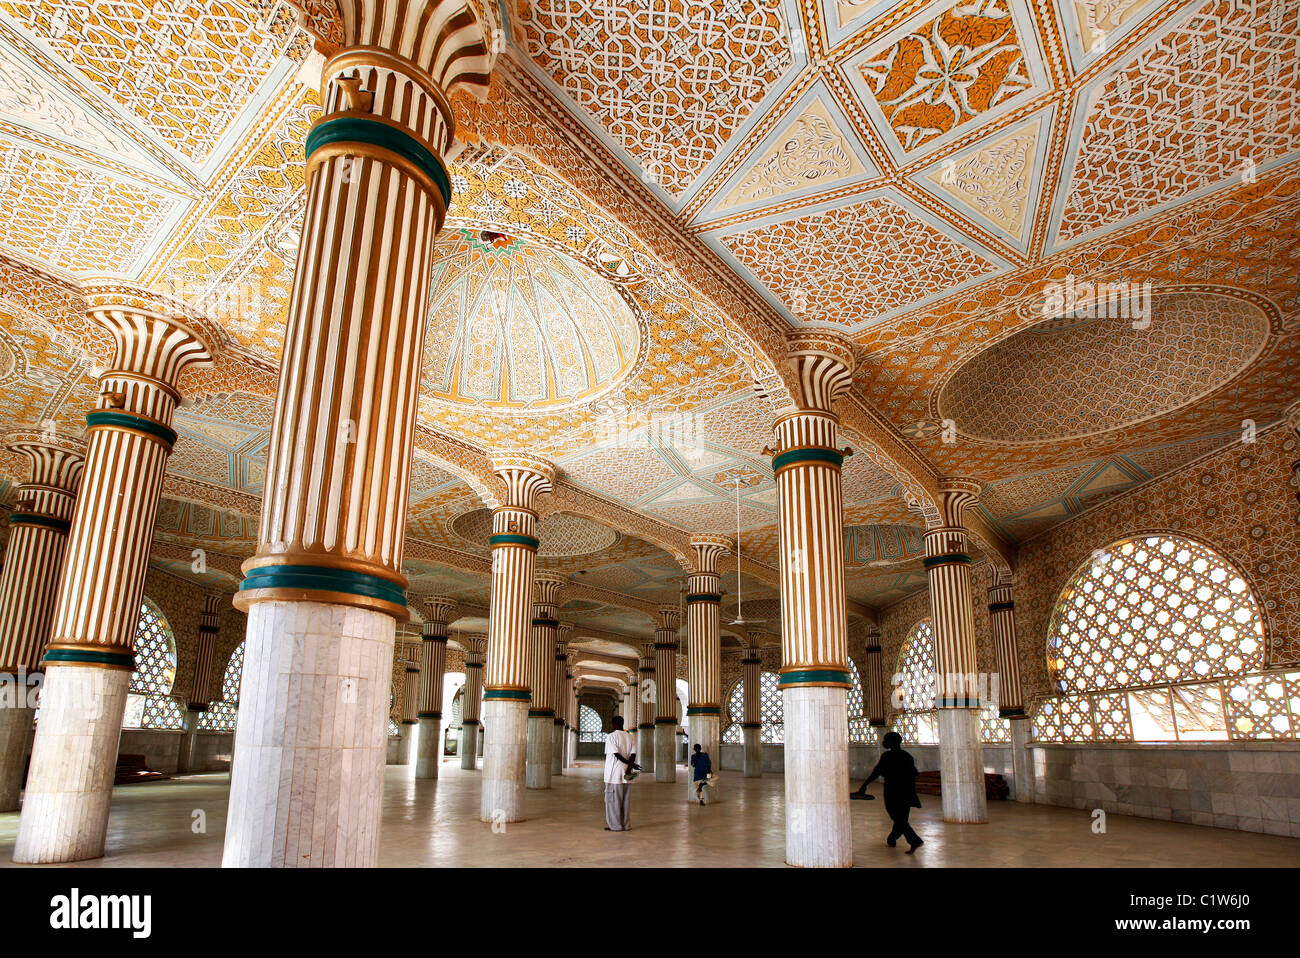 Interior of the Great Mosque, Touba, Senegal, West Africa Stock Photo